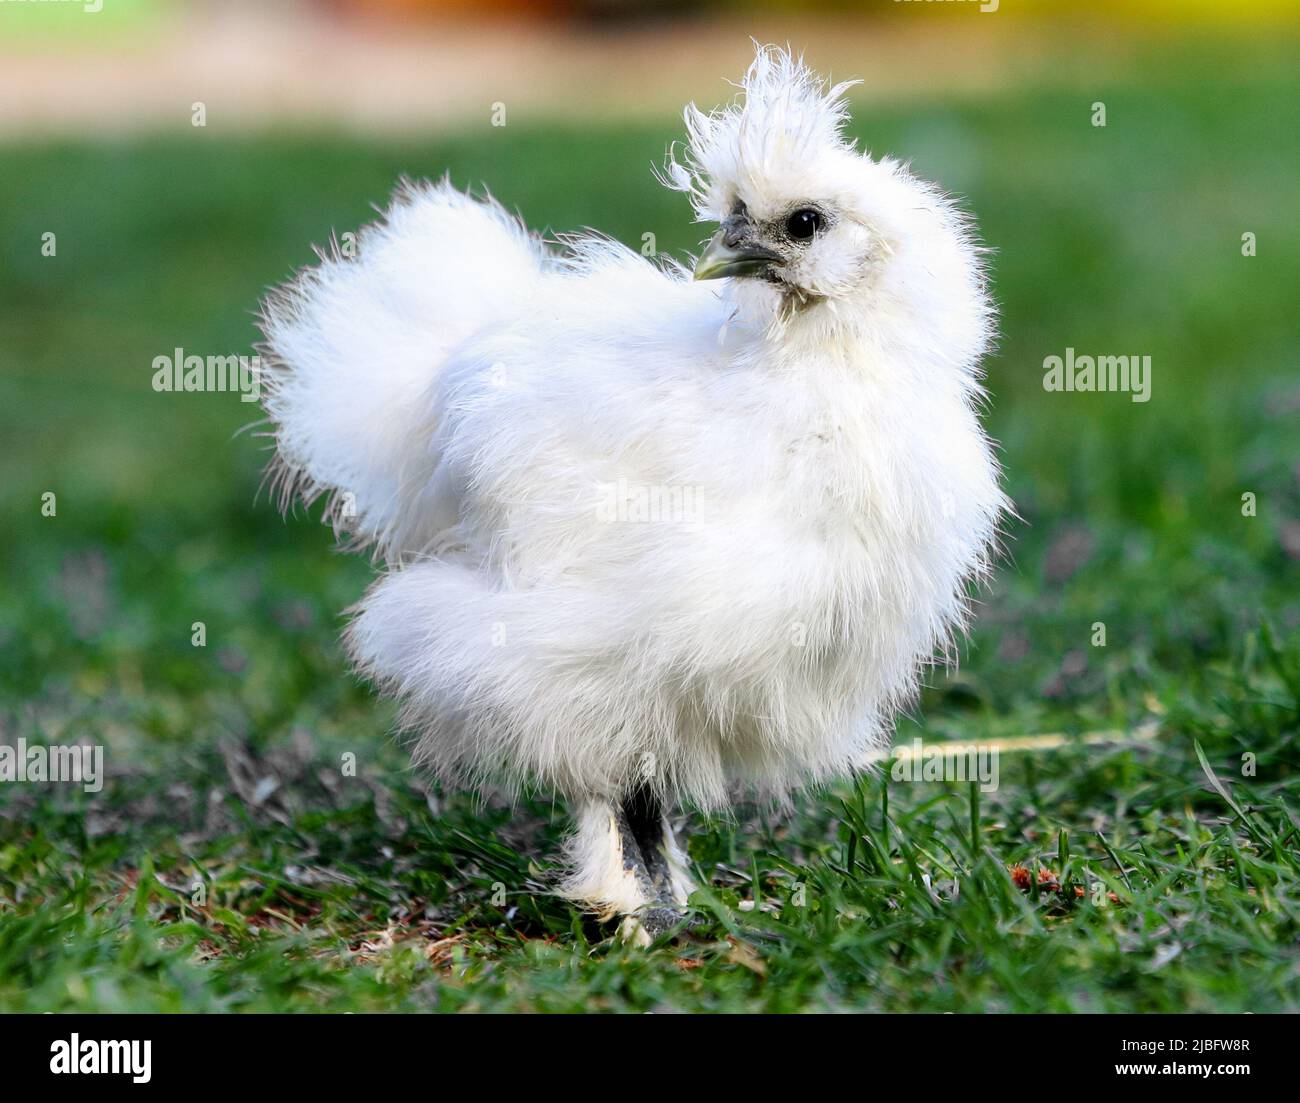 A little Silkie chickens on a grass, outdoor Stock Photo